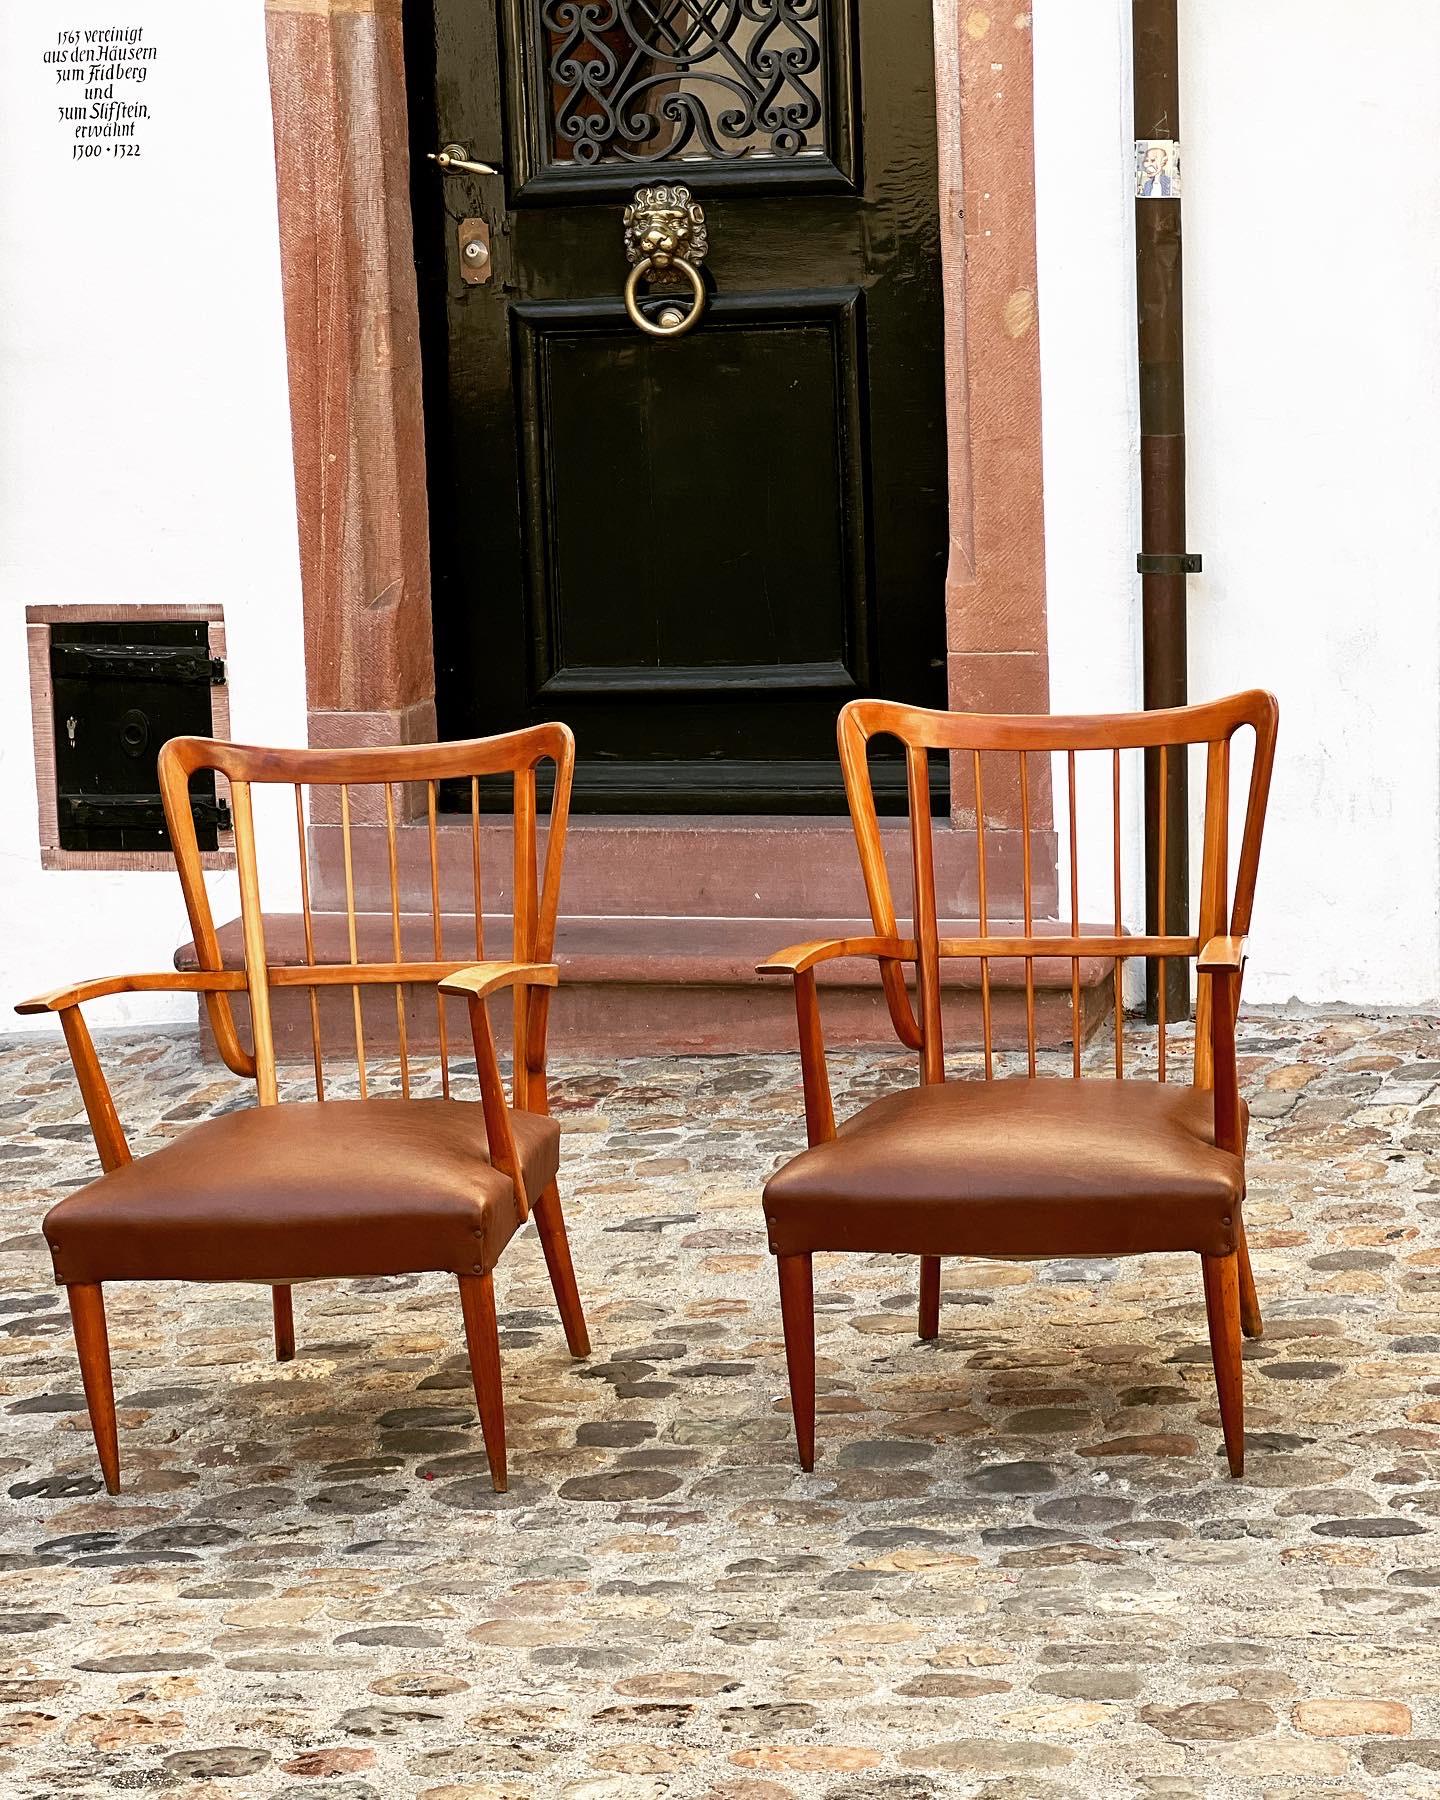 Beautiful pair of chairs made by Paolo Buffa in 1950. Frames made in cherrywood with a beautiful warm patina. The seats are upholstered in its original burgundy leather. 

The curvature of the backrest and the armrests are very typicalk for Buffas